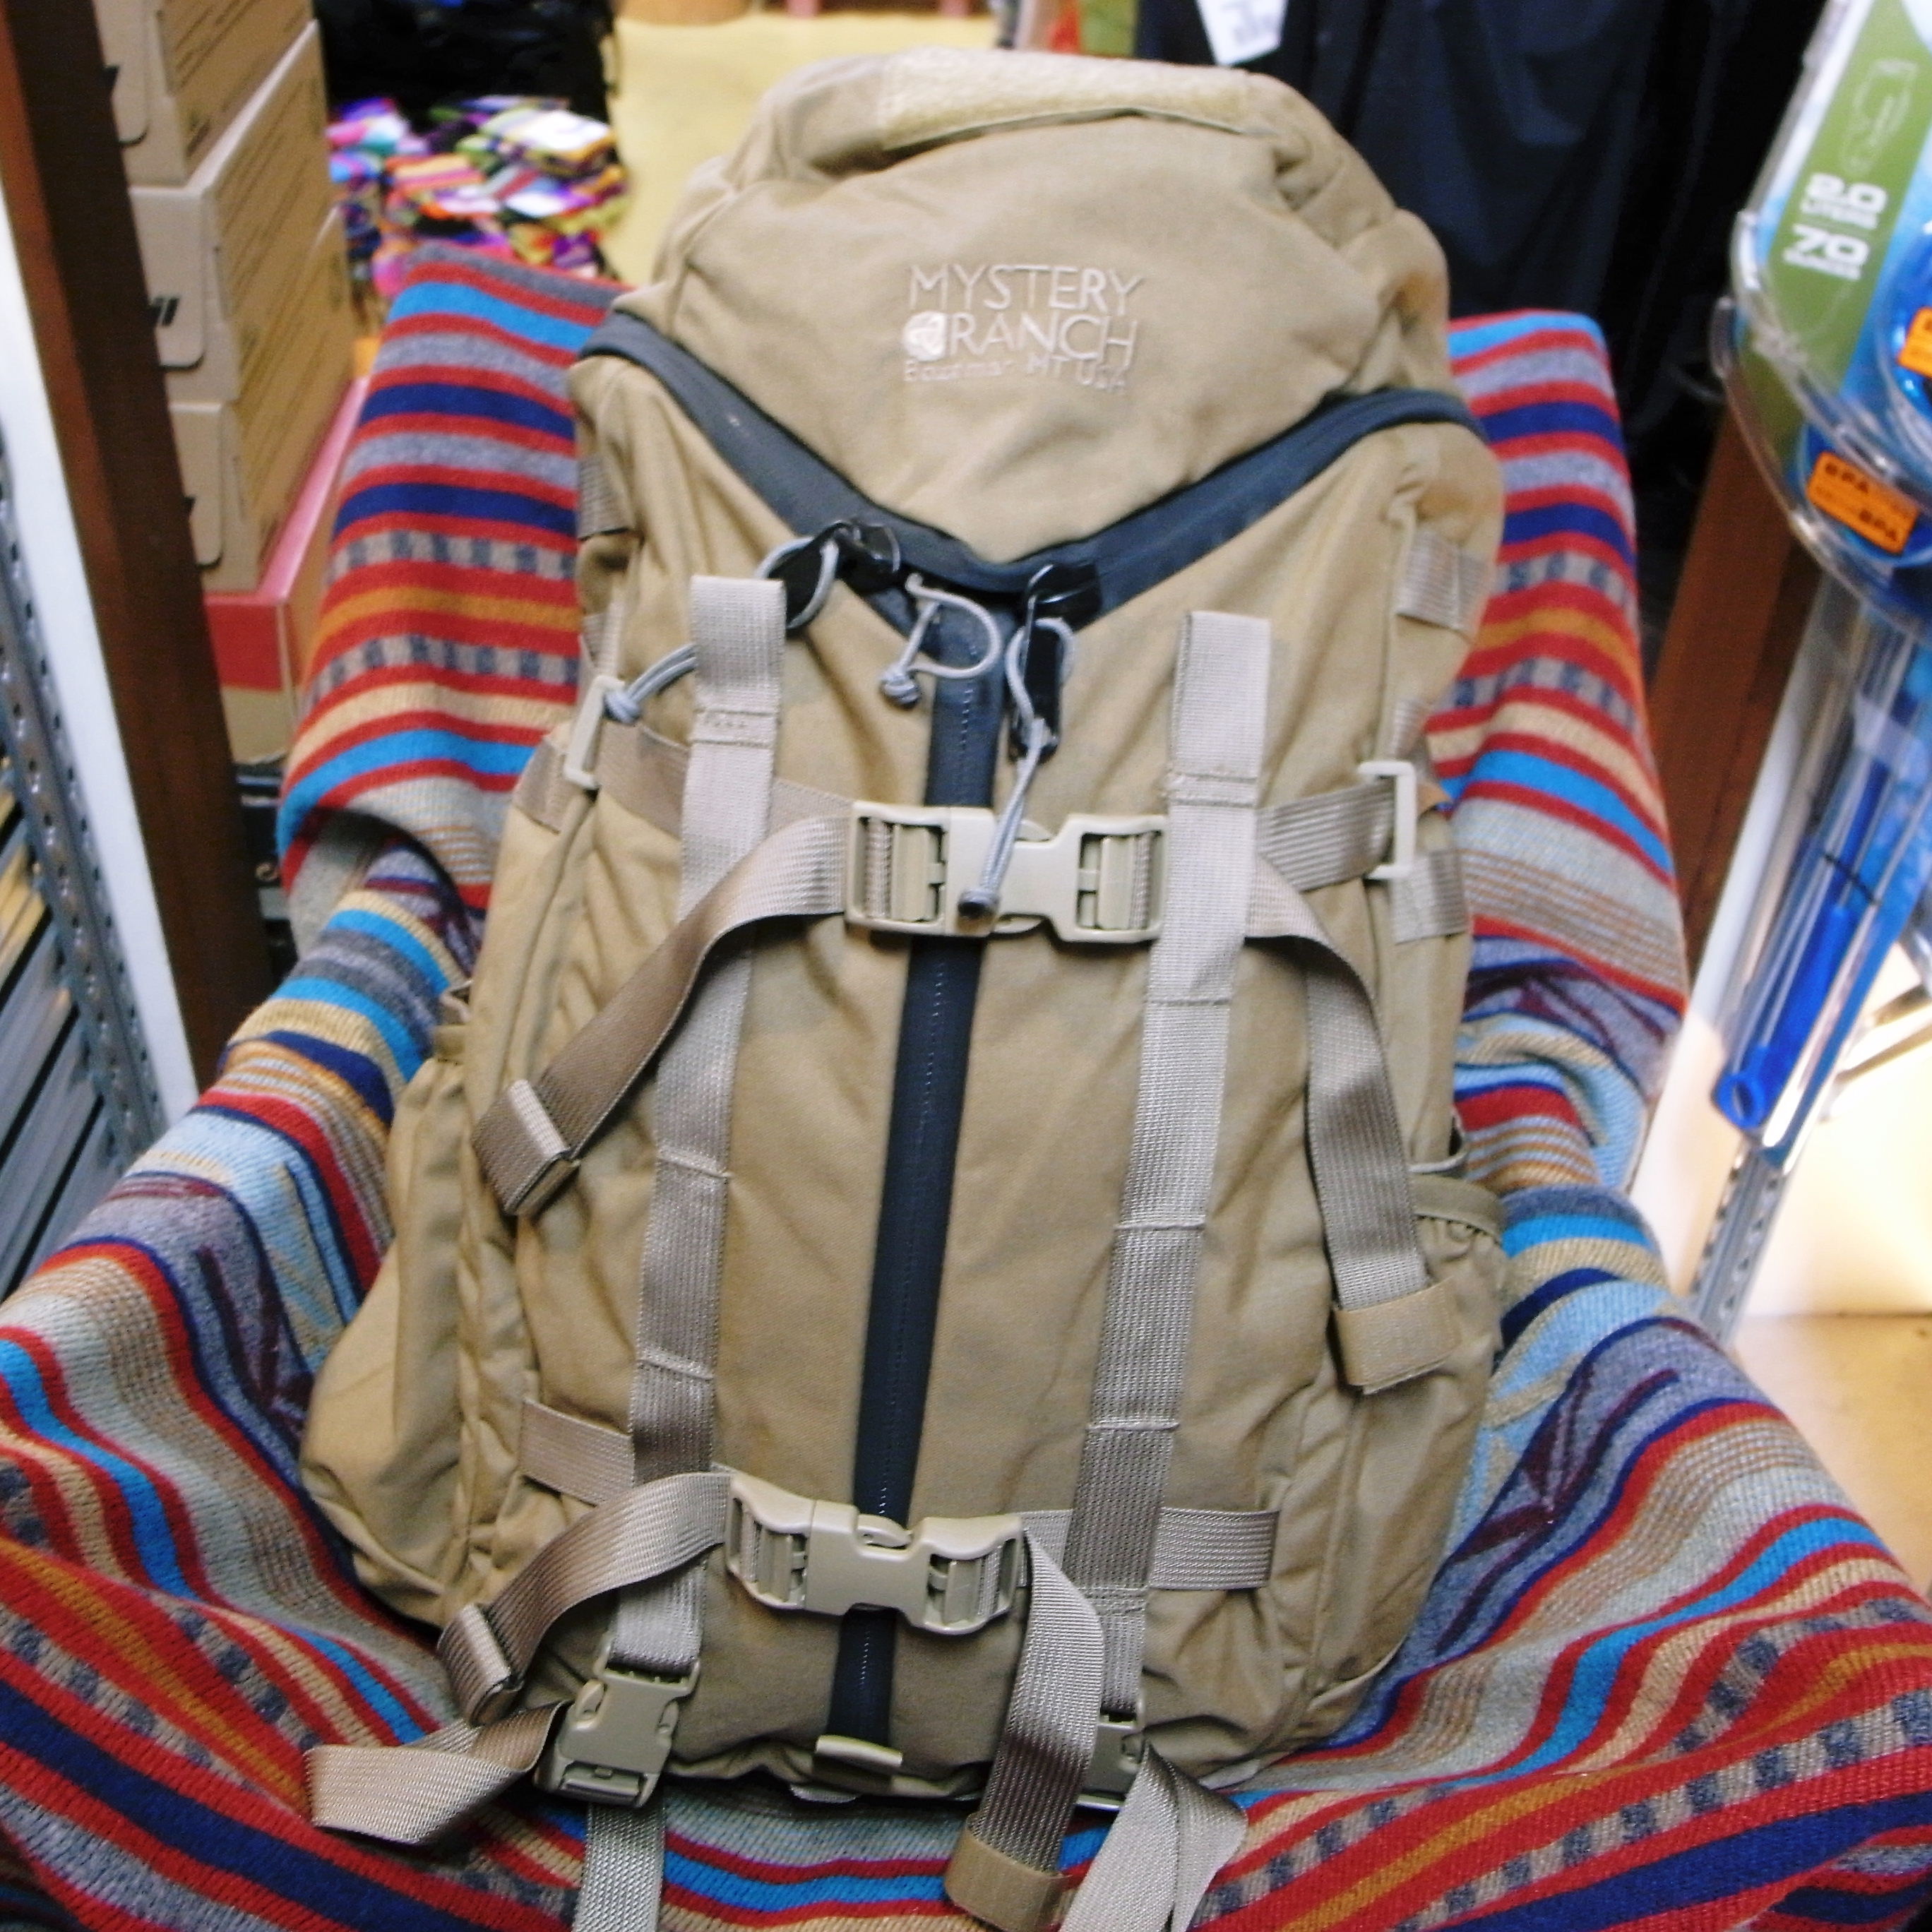 Mystery Ranch 3 Day Assault Pack ミステリーランチ 3デイアサルトパック Utility Outdoor Select Shop